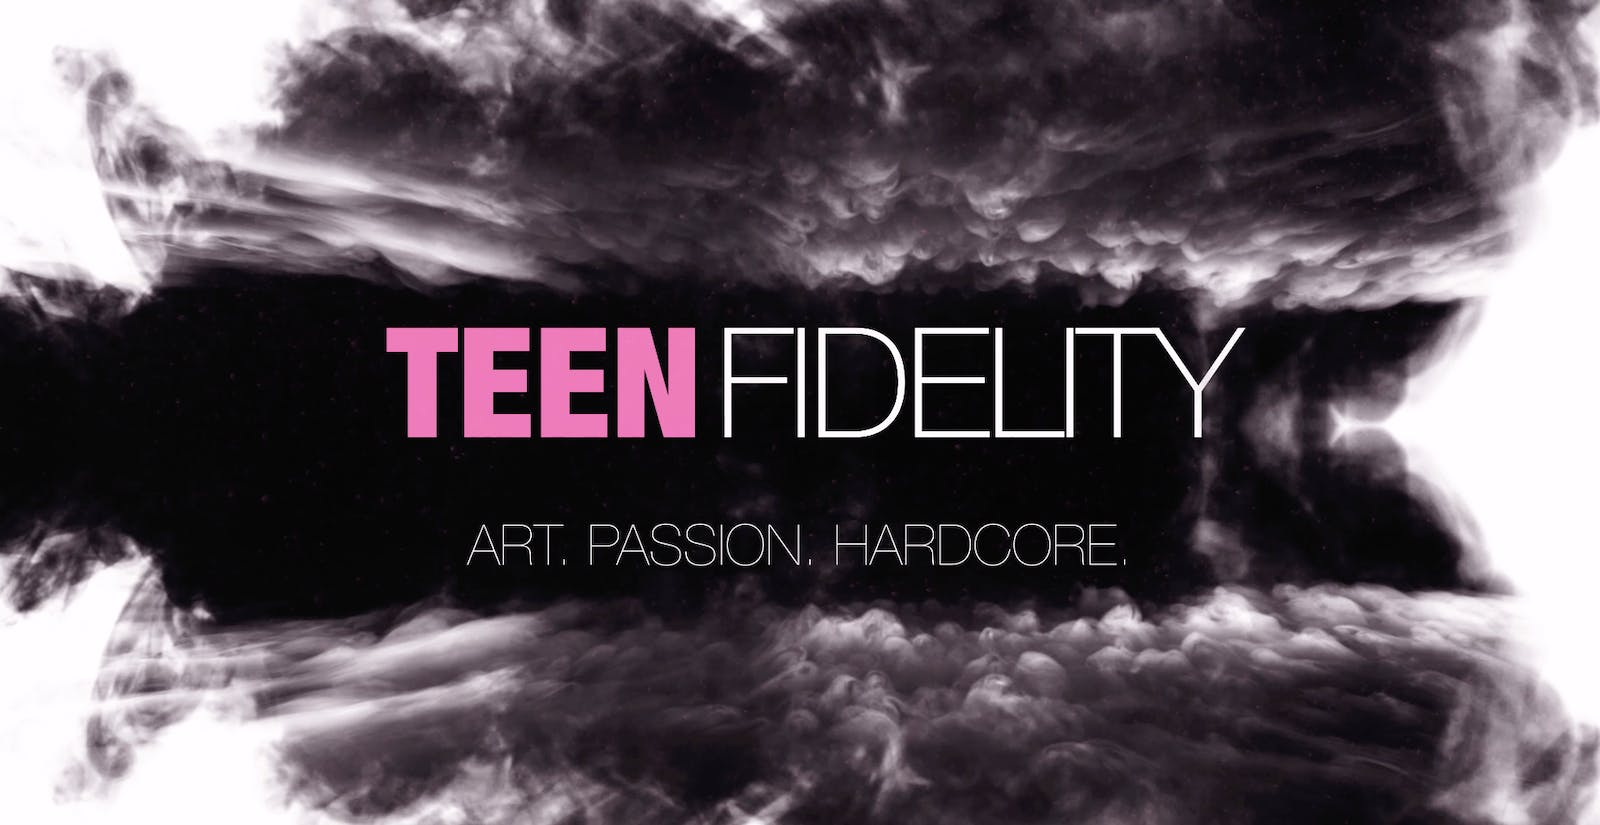 Teen Fidelity is less creepy and more thoughtful than its name suggests